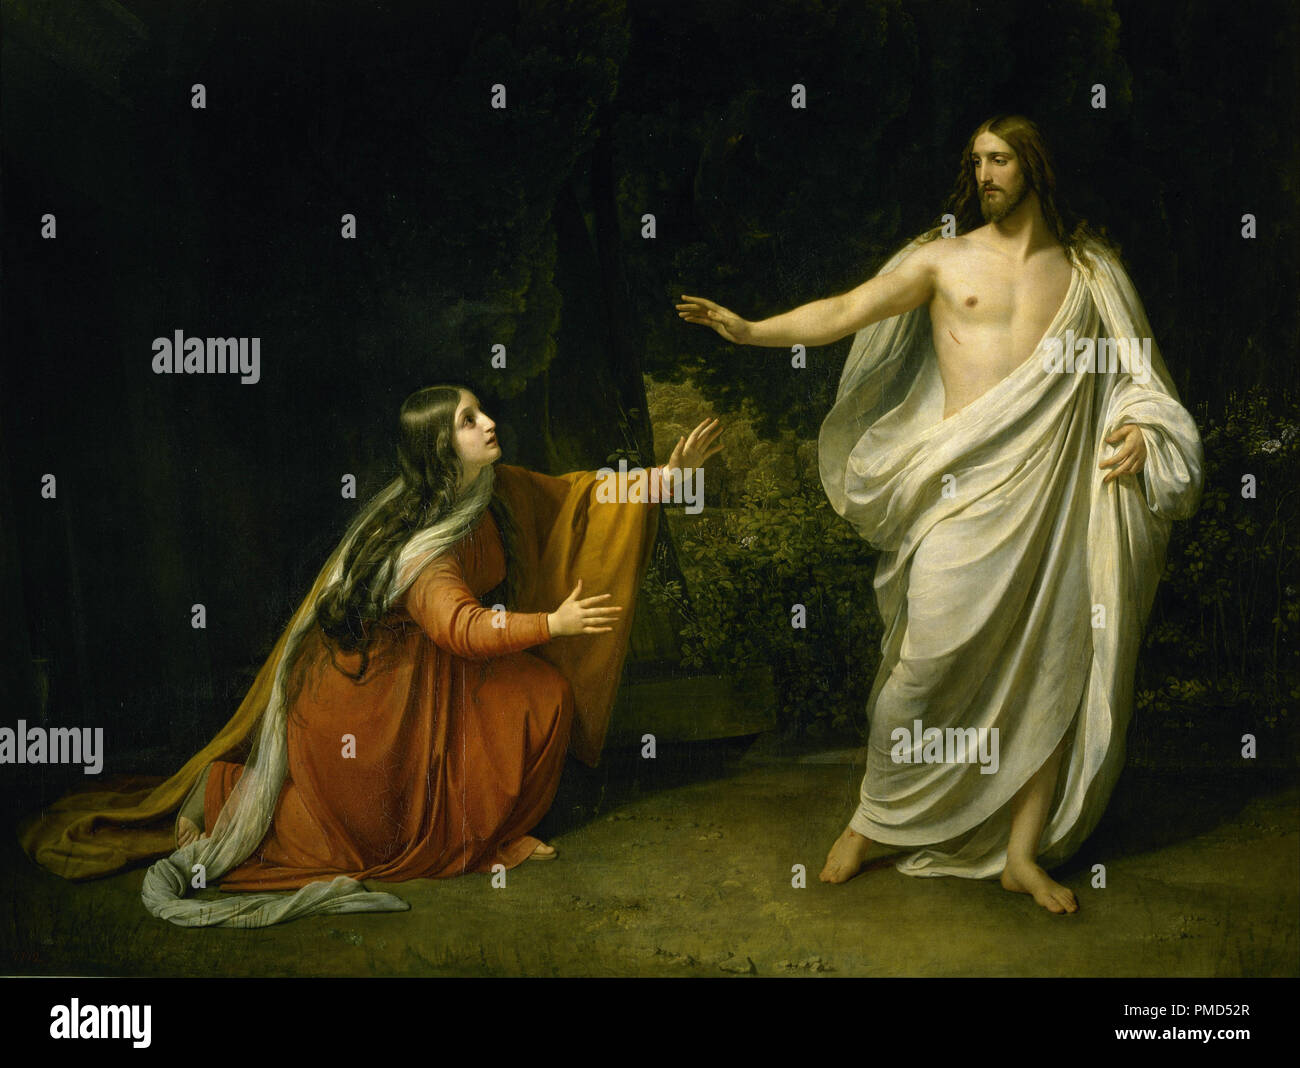 Christ's Appearance to Mary Magdalene after the Resurrection. Date/Period: 1835. Painting. Oil on canvas Oil on canvas. Height: 2,420 mm (95.27 in); Width: 3,210 mm (10.53 ft). Author: ALEXANDER ANDREYEVICH IVANOV. IVANOV, ALEXANDER ANDREYEVICH. Stock Photo